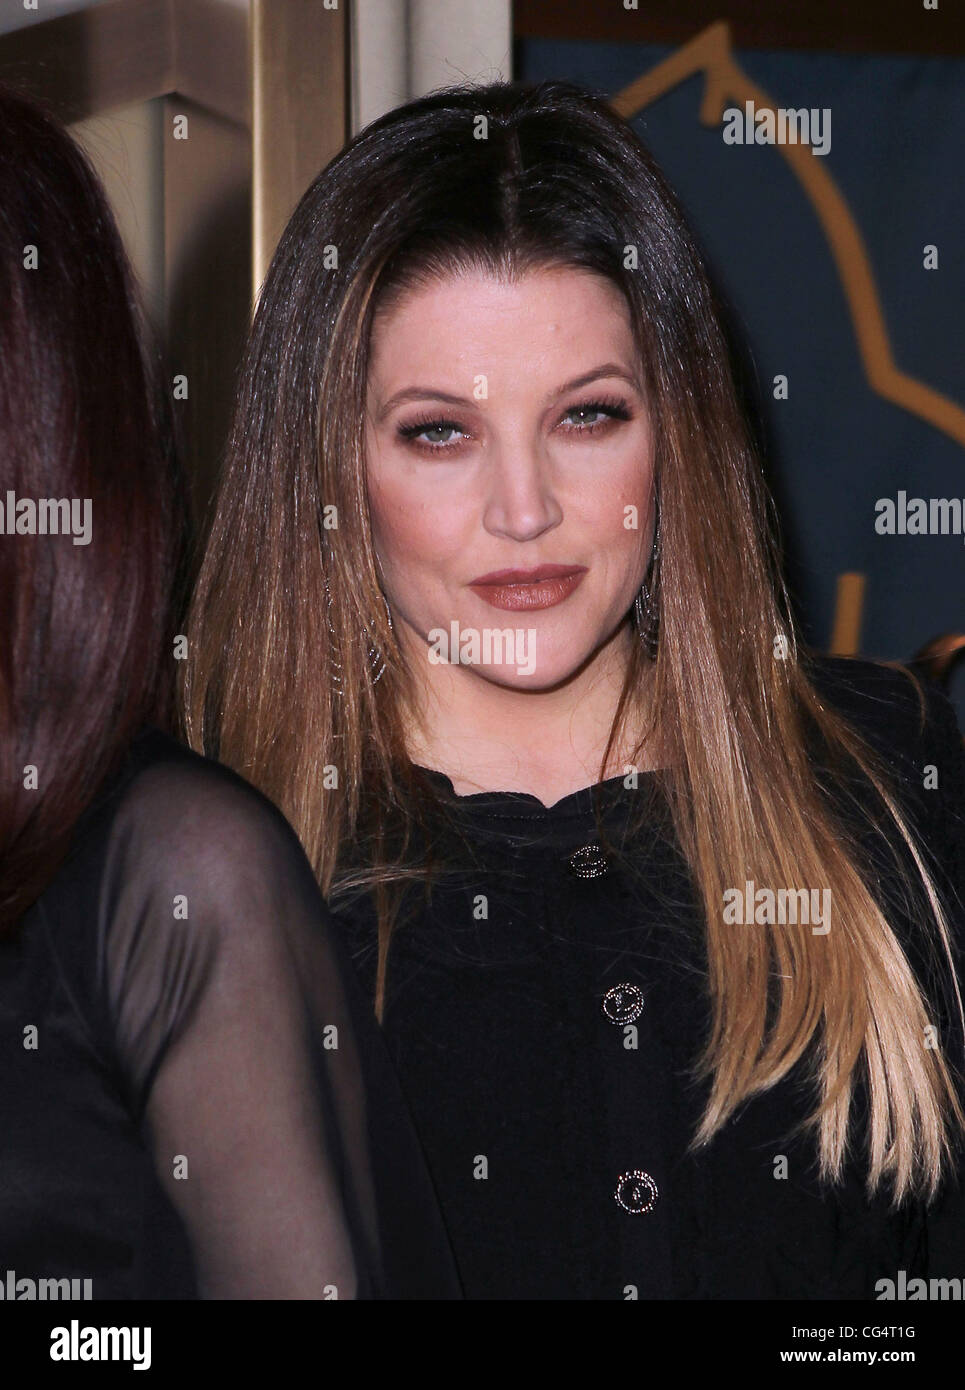 Lisa Marie Presley Nevada Ballet Theater Woman of The Year, Priscilla ...